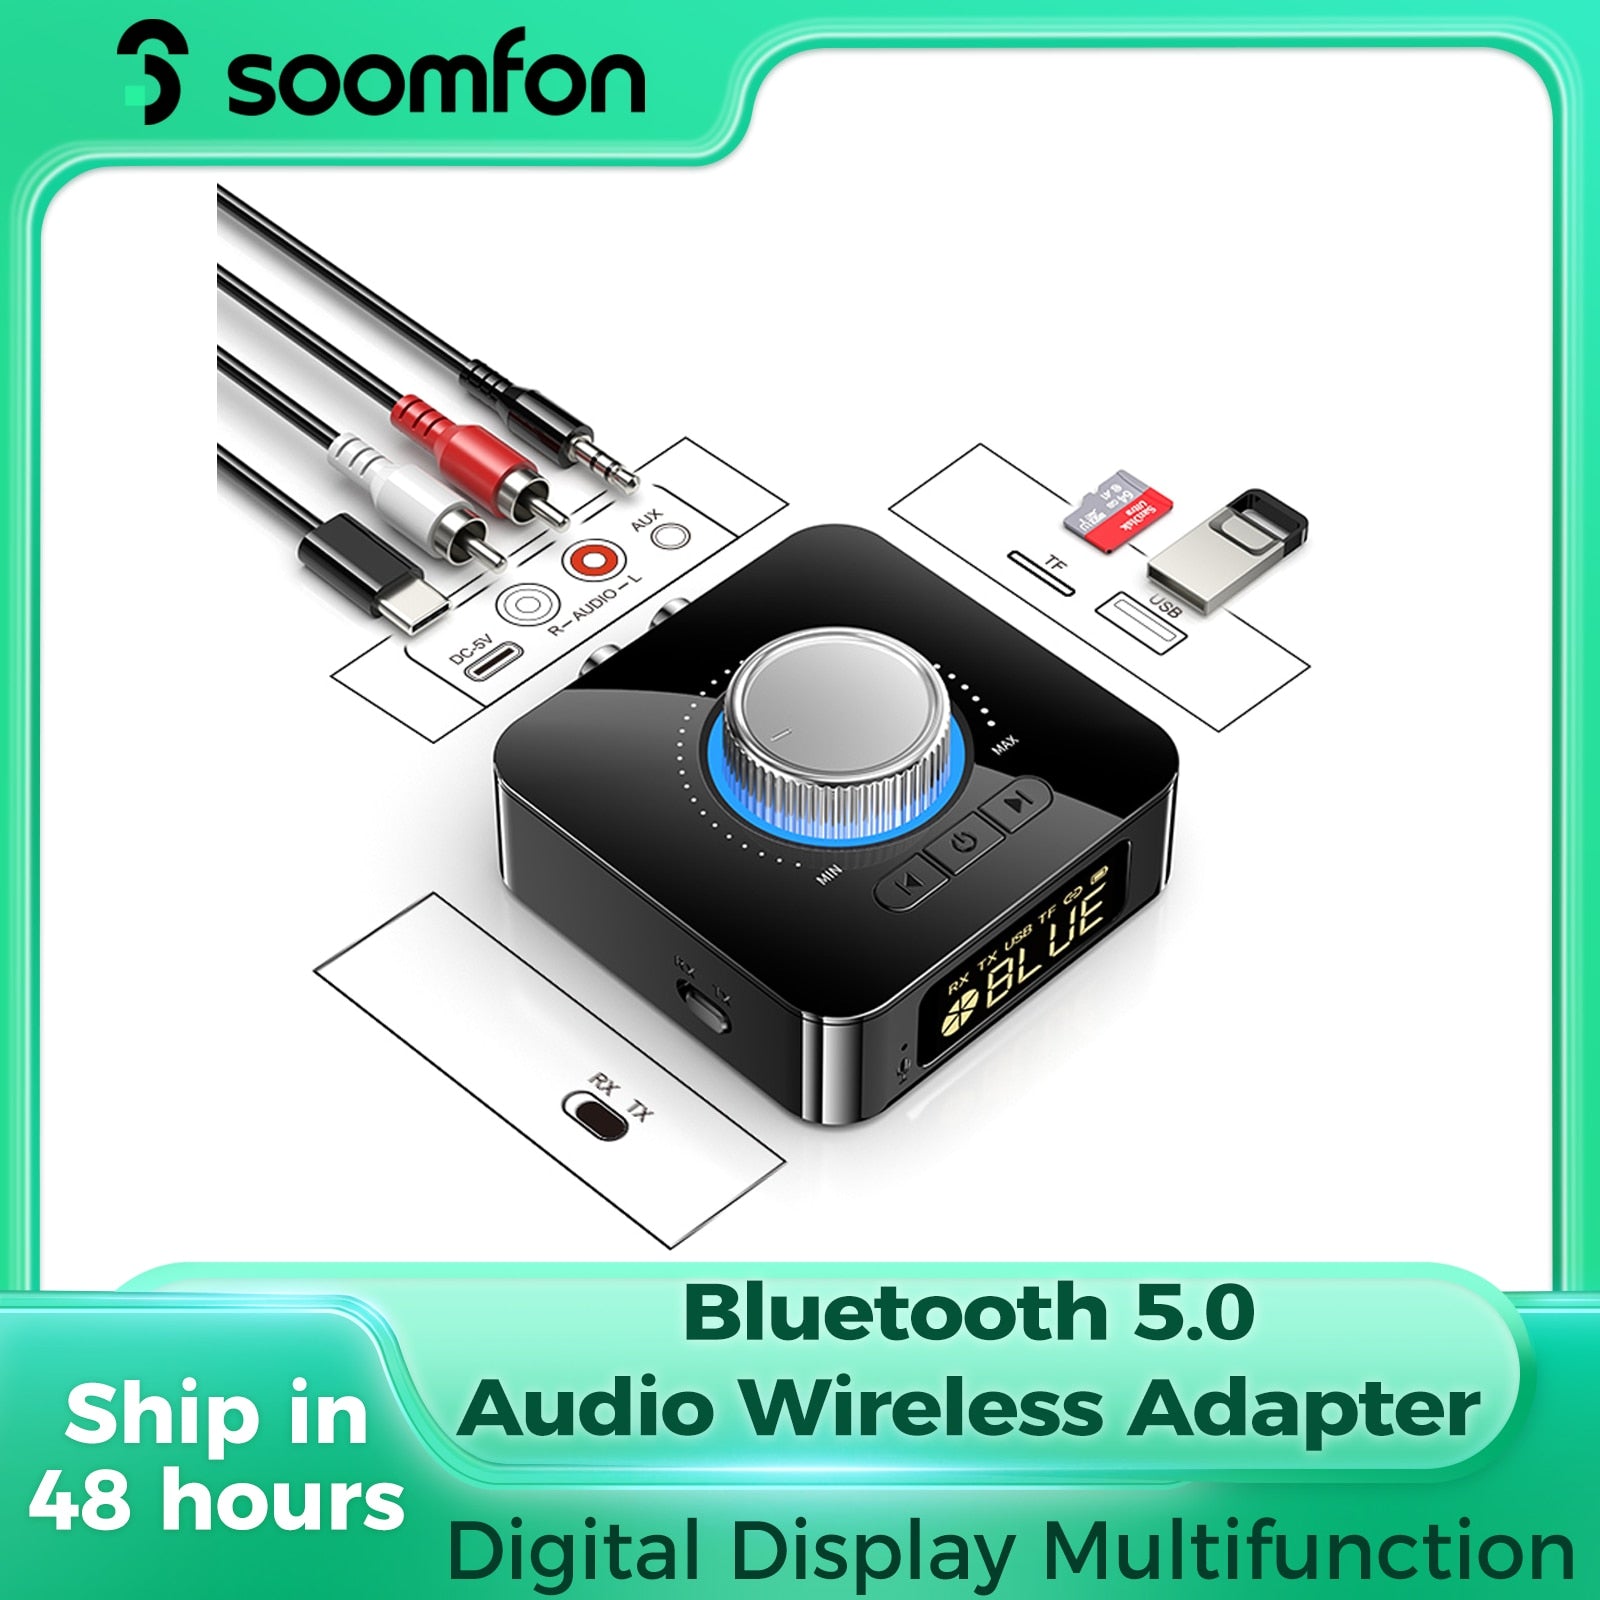 SOOMFON Bluetooth 5.0 Audio Adapter TV 2-in-1 Receiver Transmitter 3.5mm AUX RCA TF/U-Disk Jack Led Display for Home Car Stereo